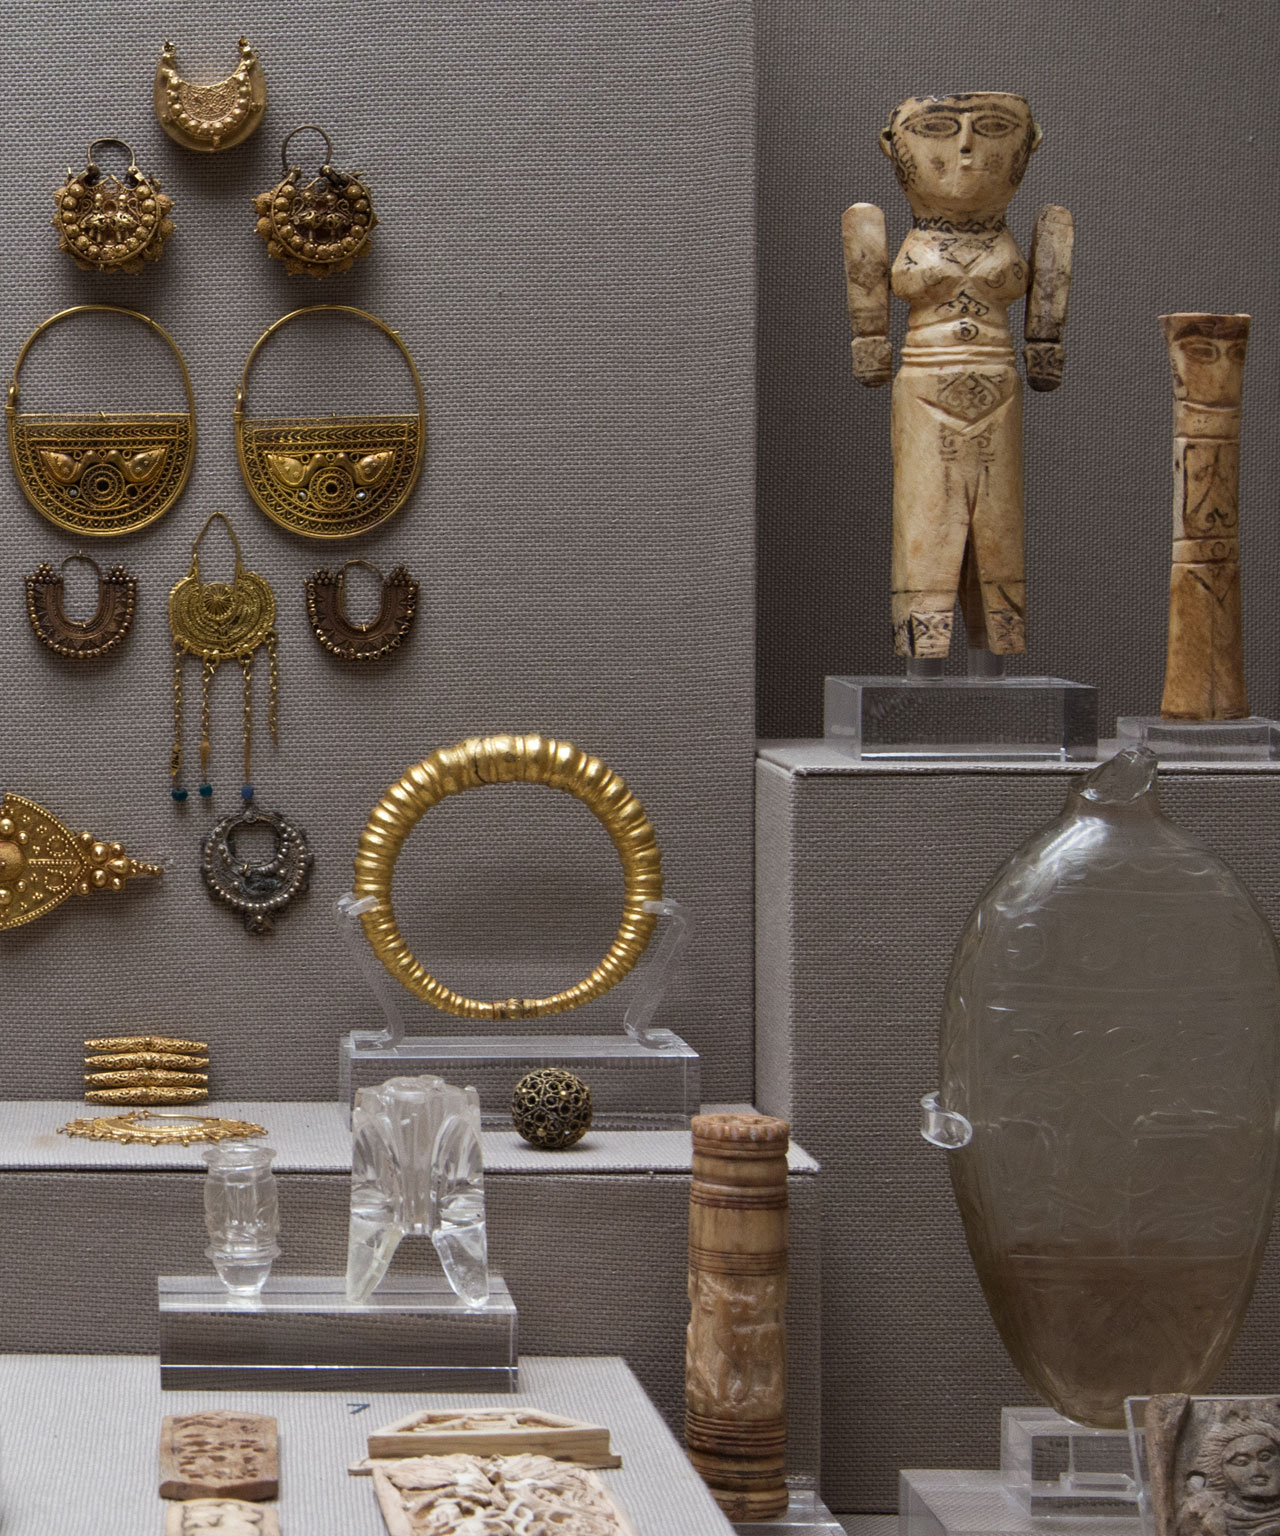 Jewellery and ivory carvings from Egypt, Syria and Iran, 8th-12th c. Photo © Costas Voyatzis.